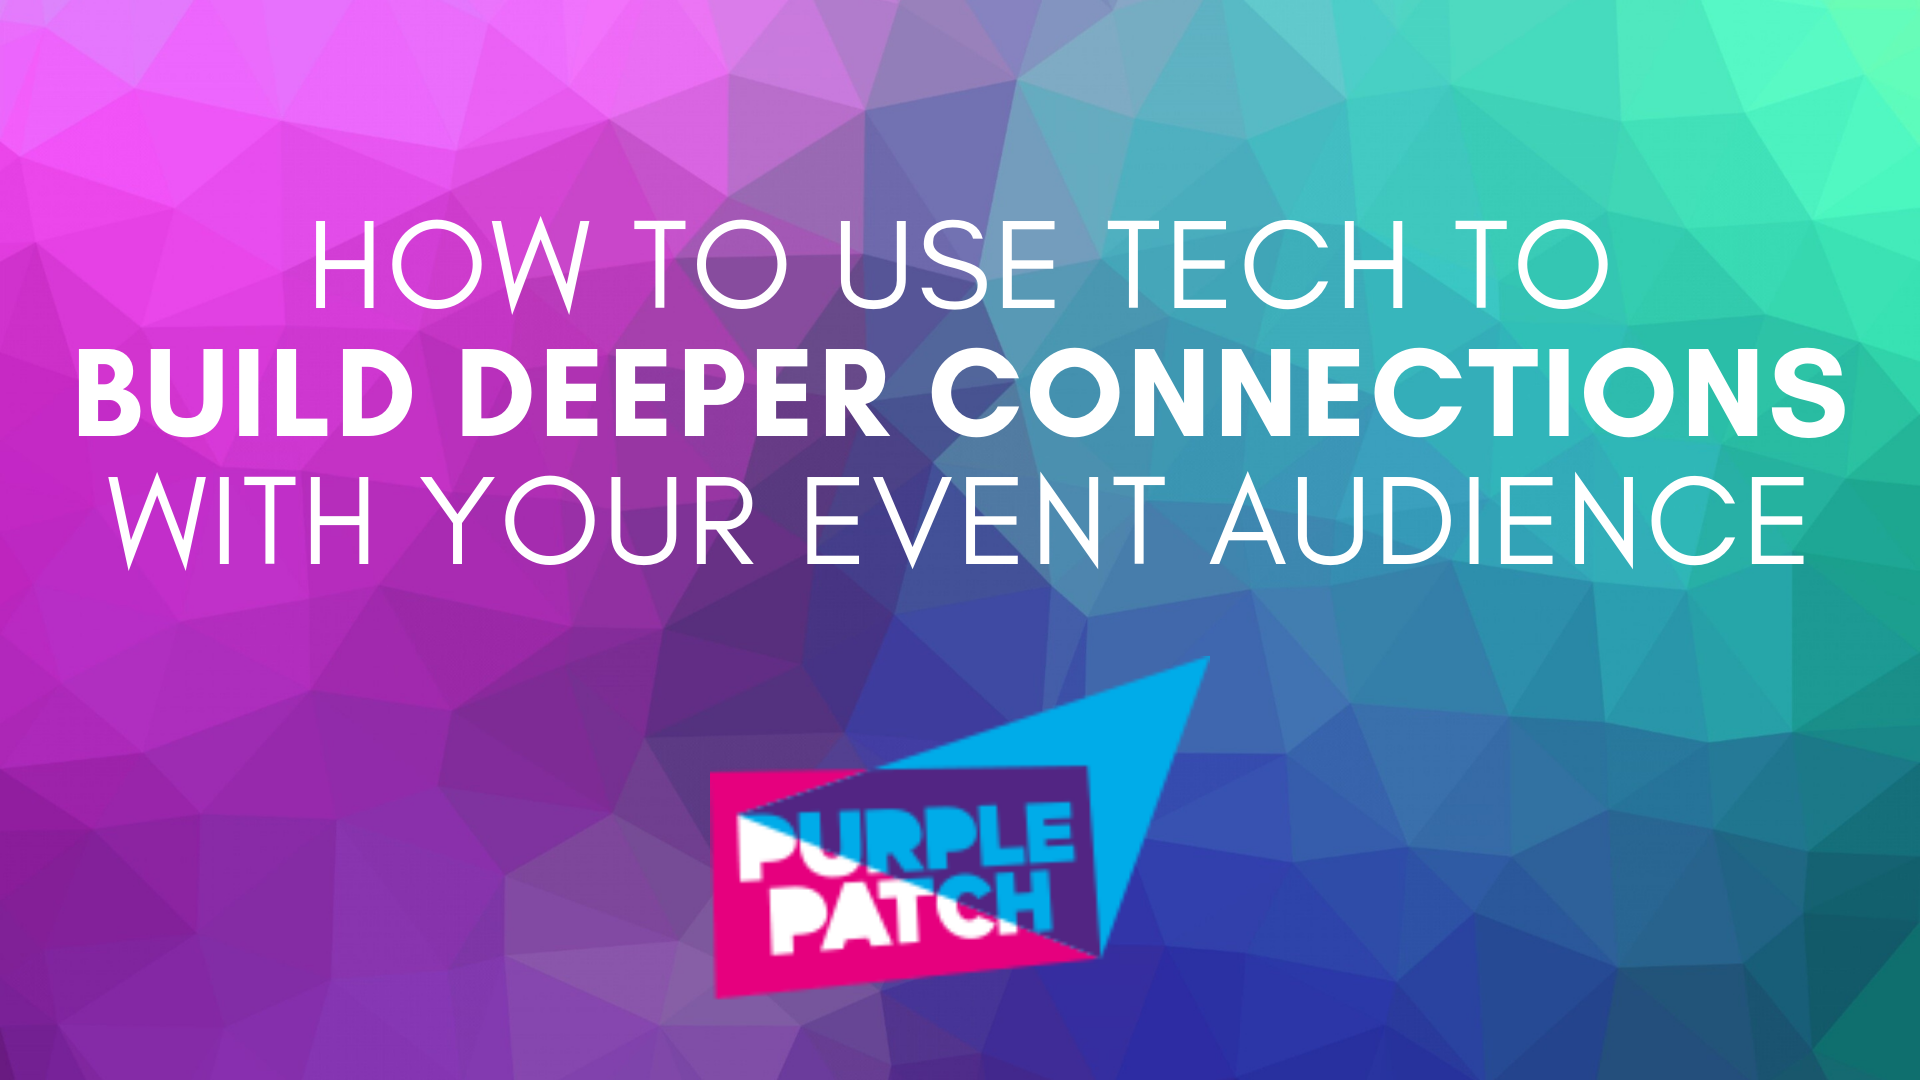 How to Use Tech to Build Deeper Connections With Your Event Audience